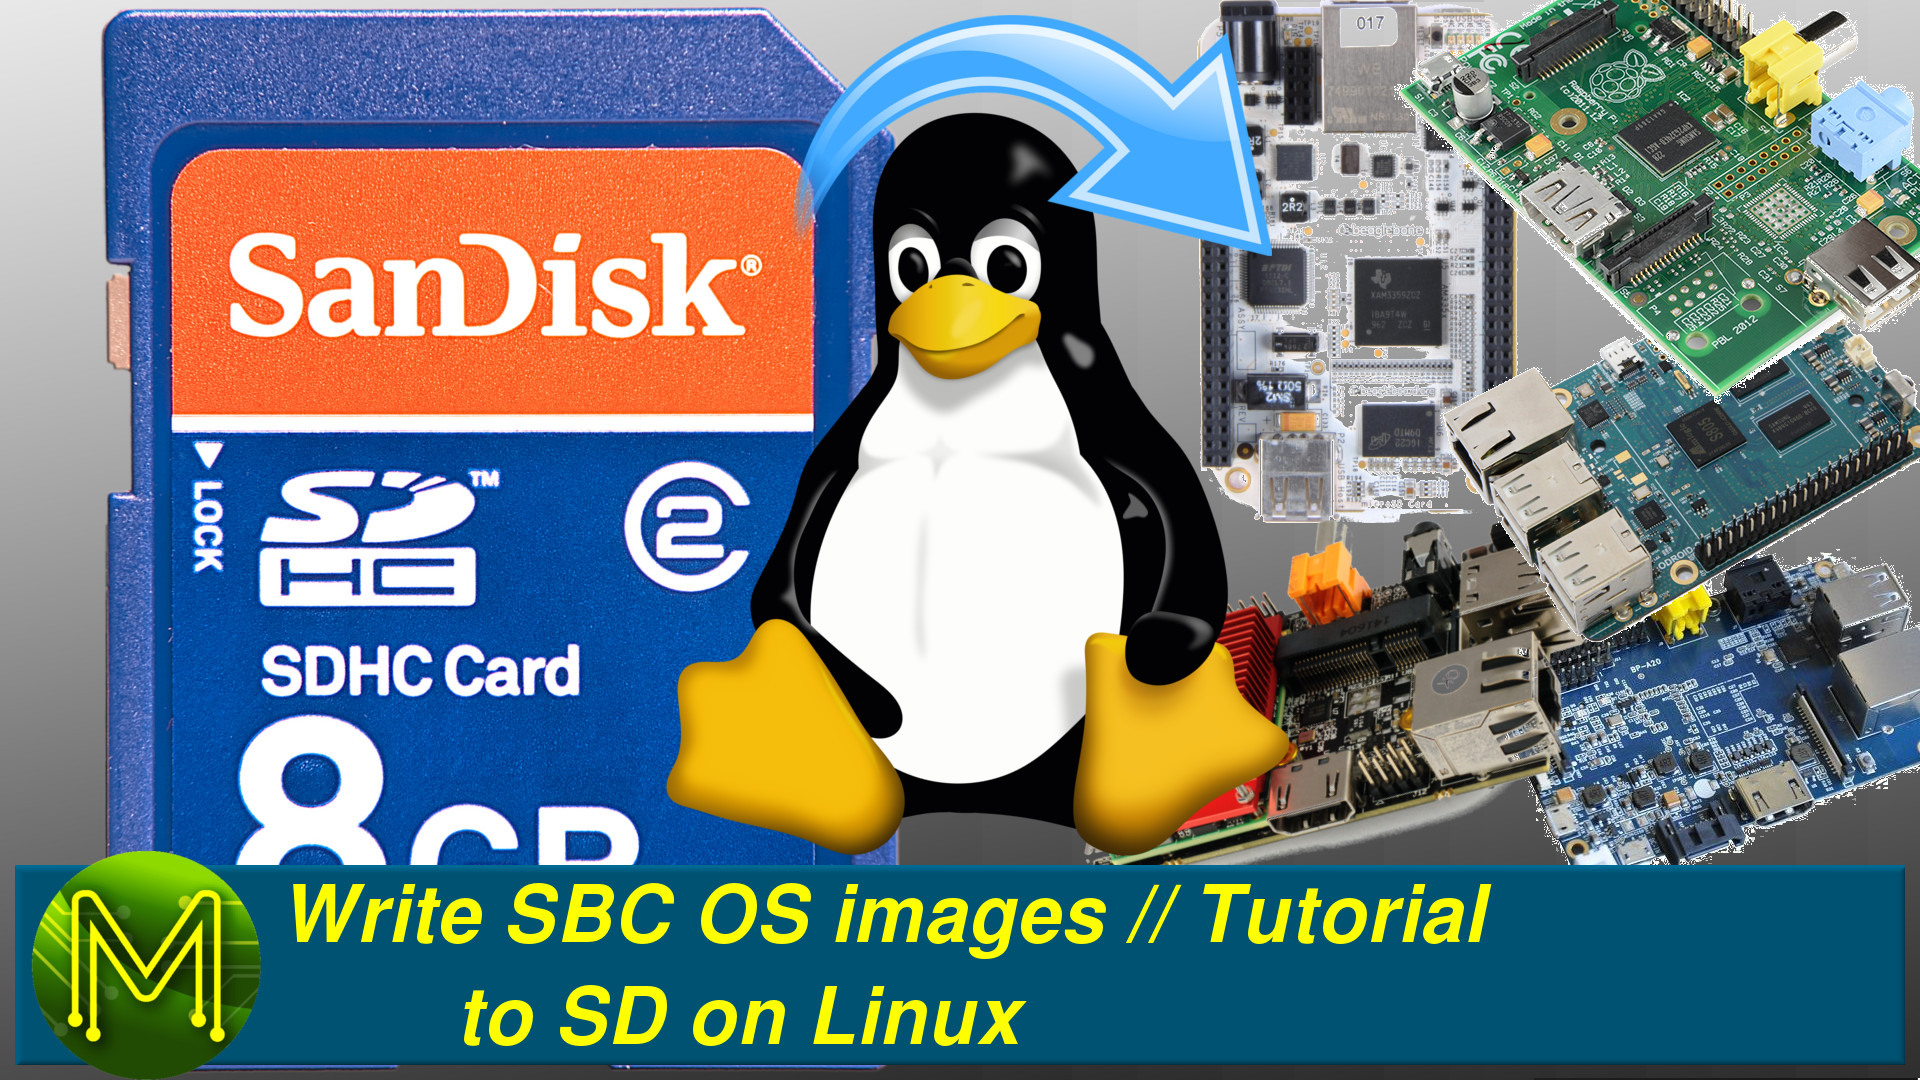 Write SBC OS images to SD on Linux - Tutorial